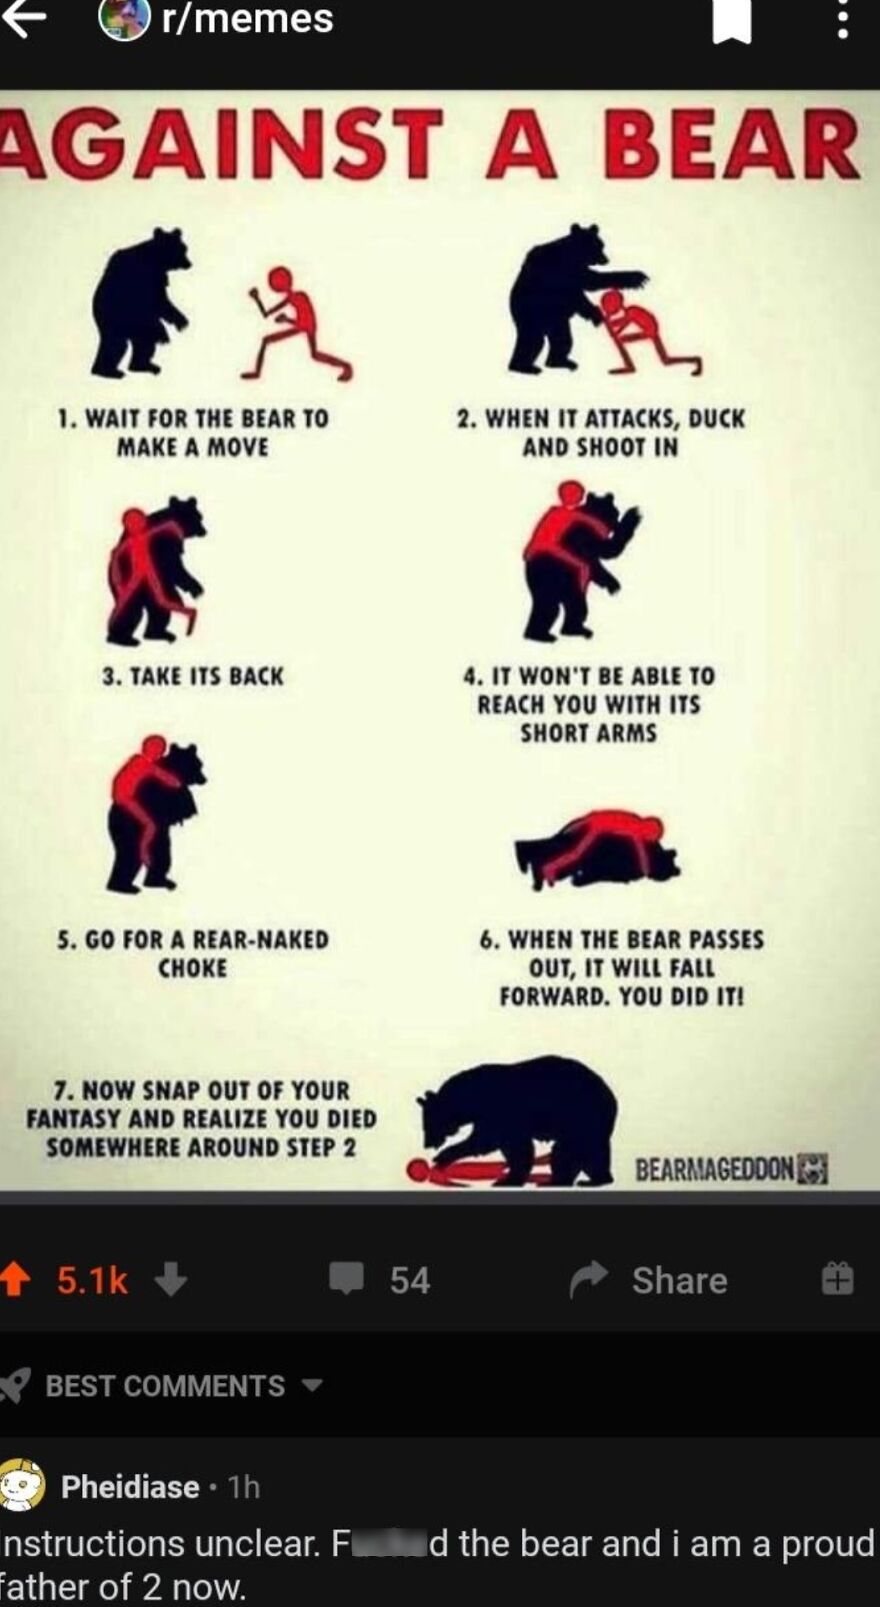 instructions unclear - poster - rmemes Against A Bear 2. When It Attacks, Duck And Shoot In 1. Wait For The Bear To Make A Move 3. Take Its Back 5. Go For A RearNaked Choke 7. Now Snap Out Of Your Fantasy And Realize You Died Somewhere Around Step 2 Best 